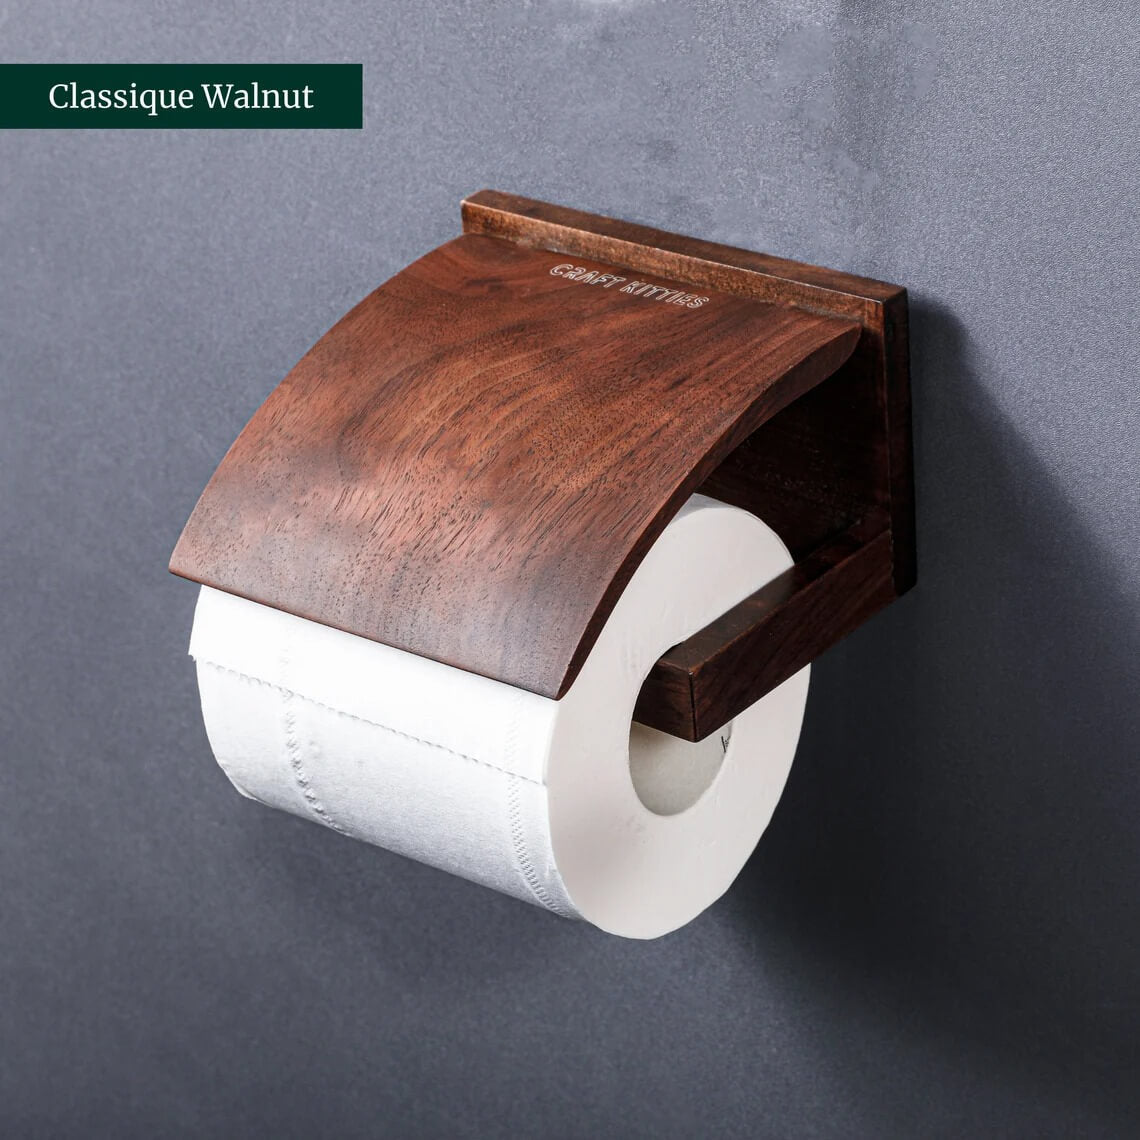 Autumn Alley Galvanized Double Toilet Paper Roll Holder With Shelf